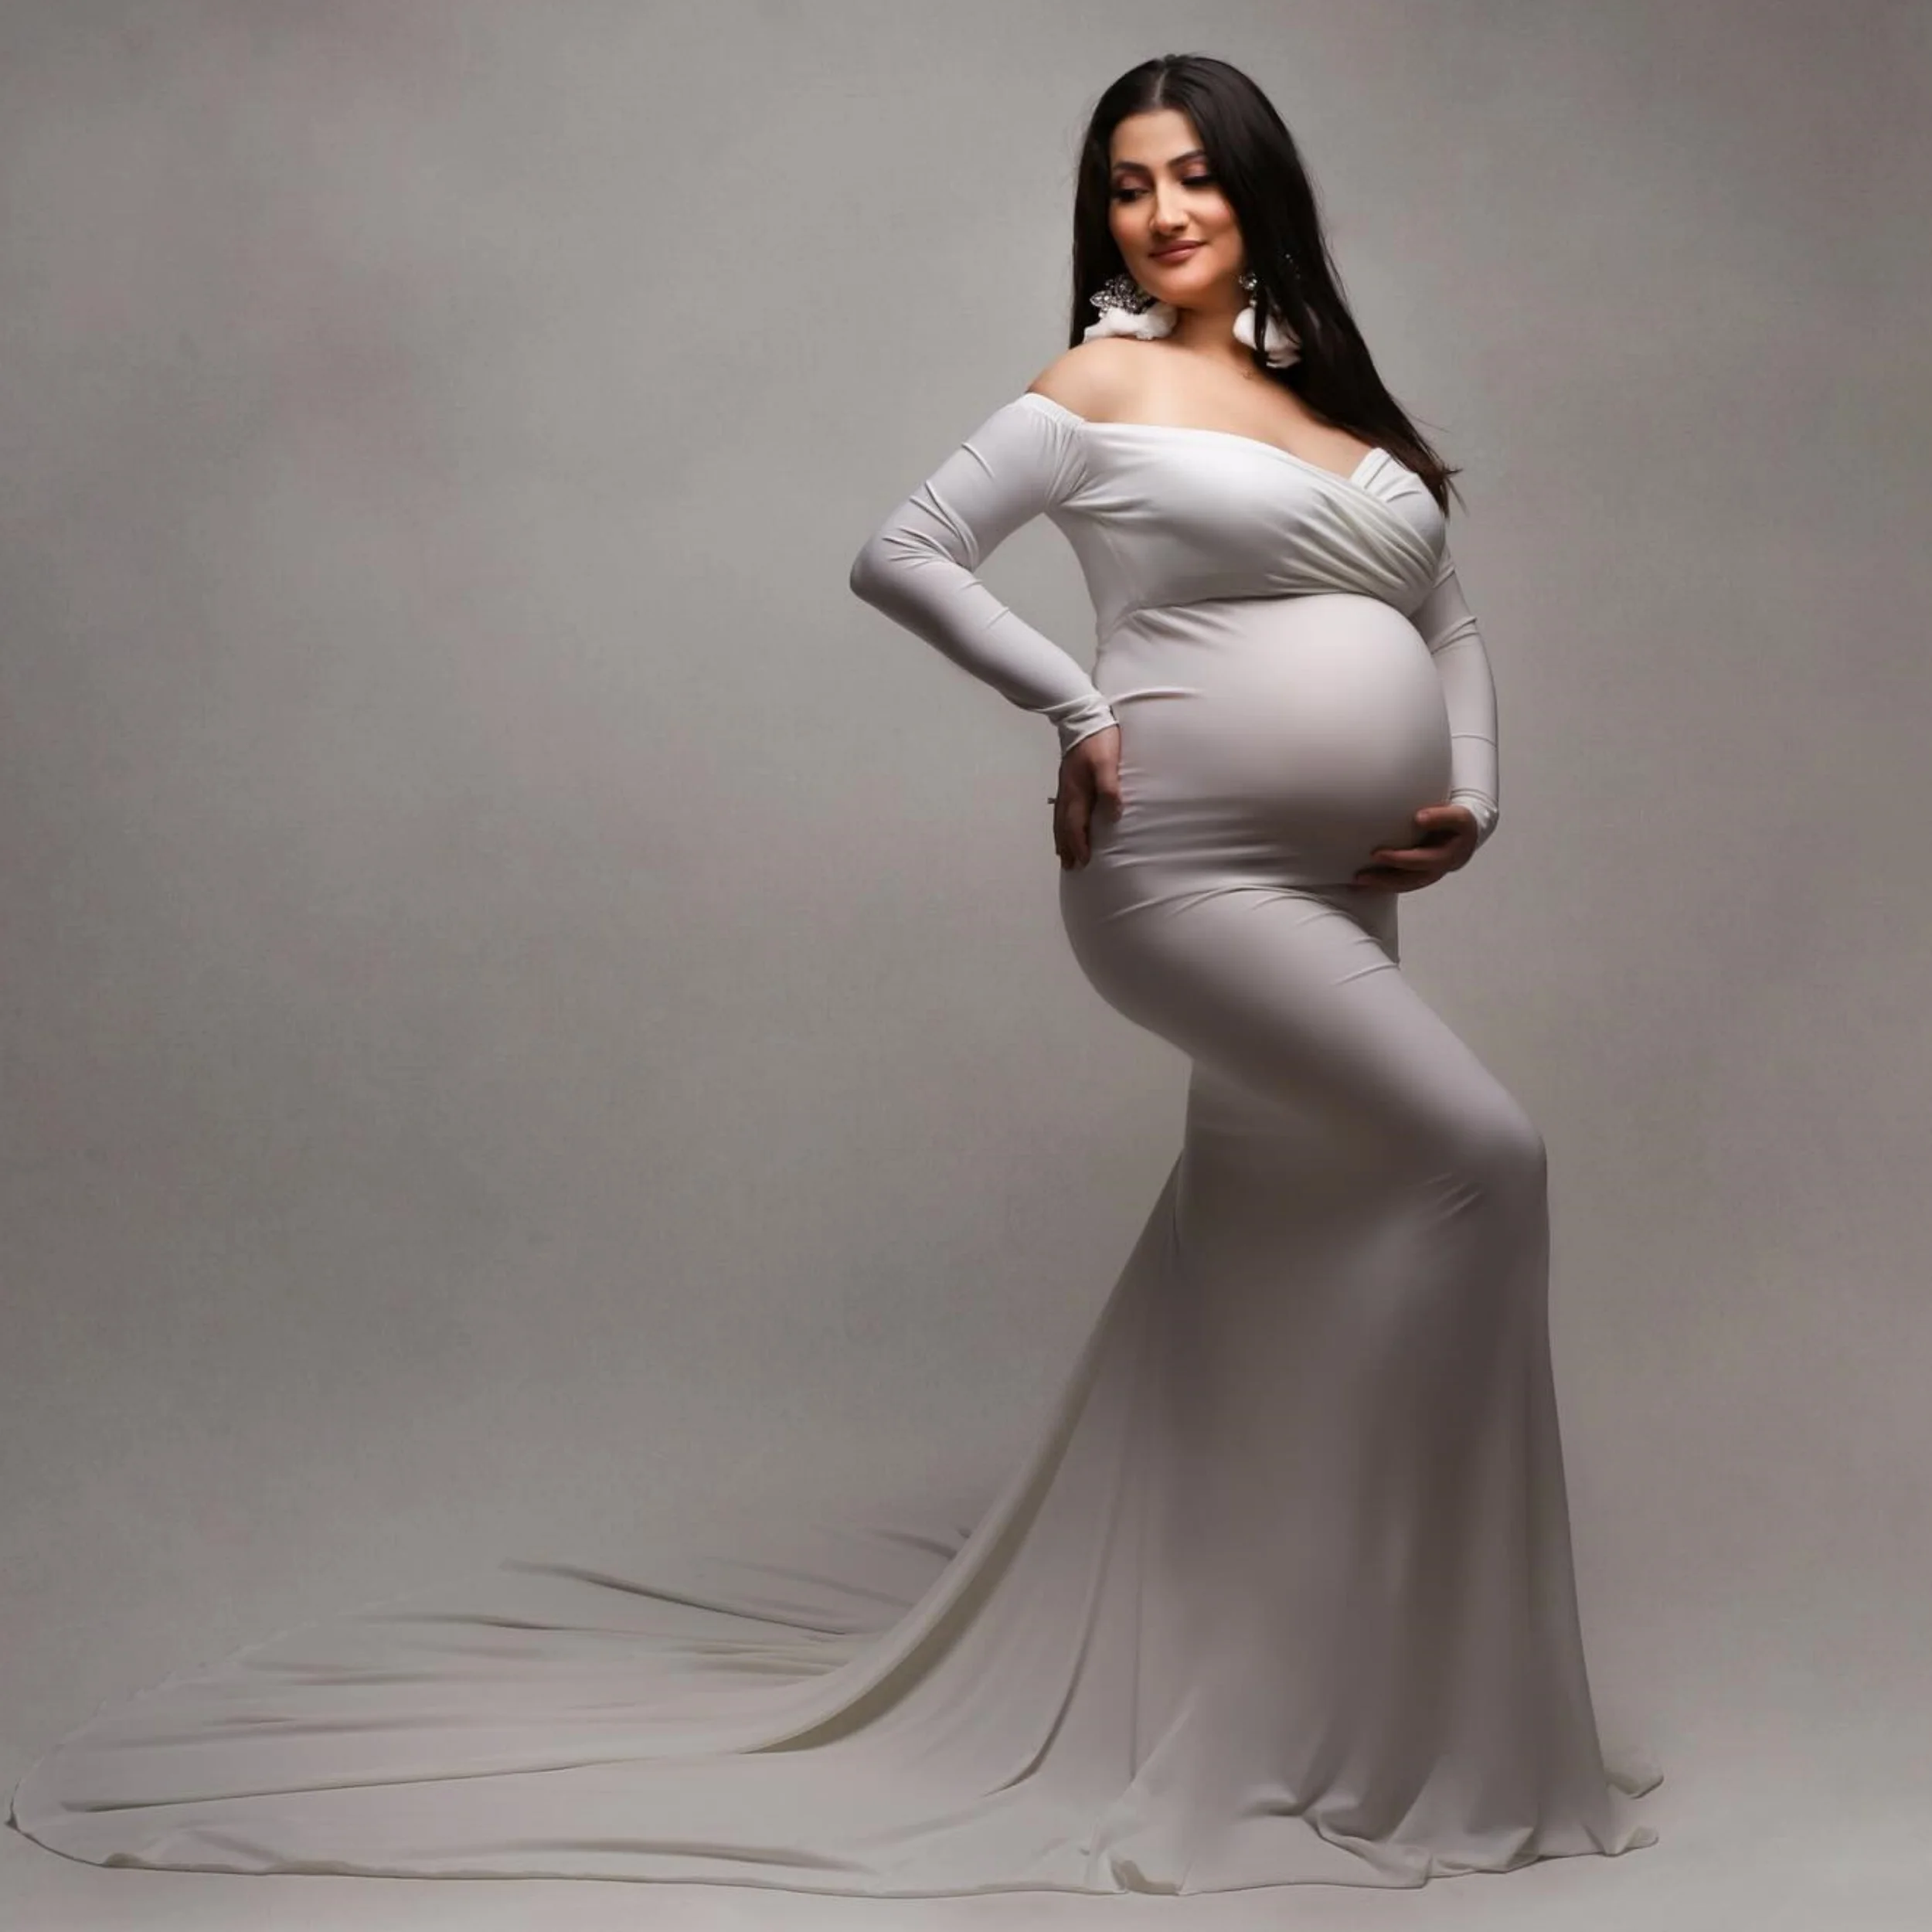 

White Mermaid Maternity Dresses Simple Sweetheart Long Sleeves Vestidos For Baby Shower Photoshoot Pros Pregnant Woman Gowns